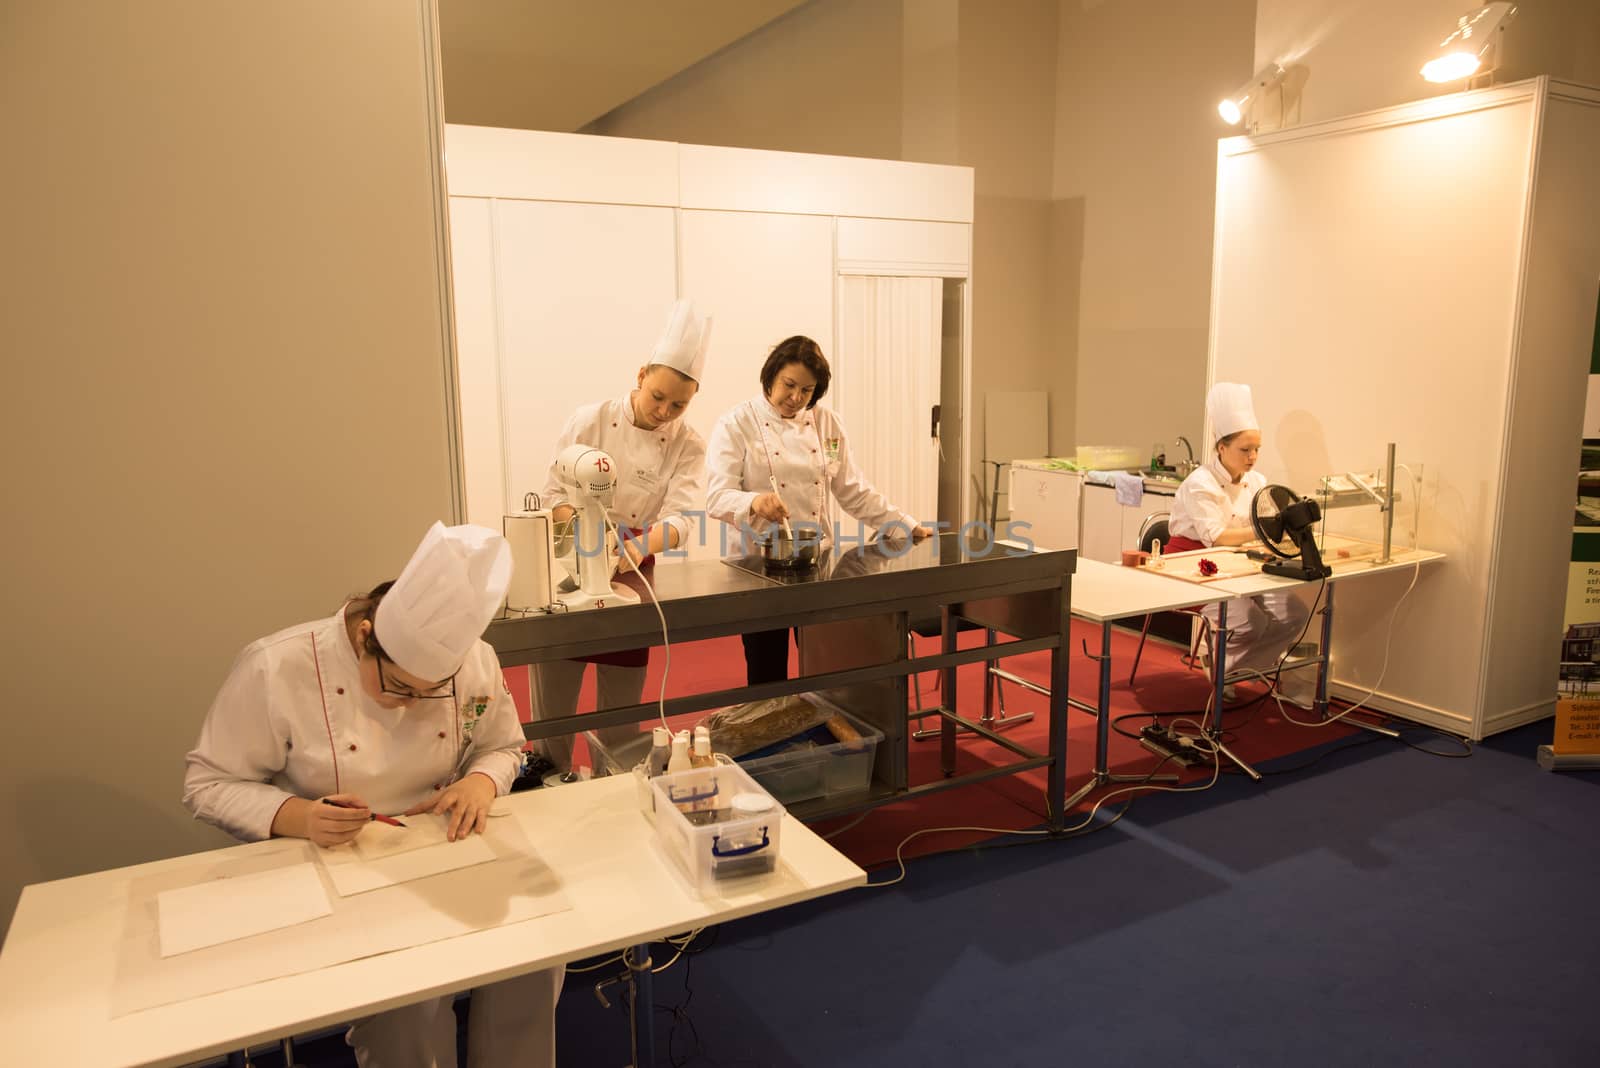 Four women are preparing food while attending an event at the convention trade center in Brno. BVV Brno Exhibition center. Czech Republic